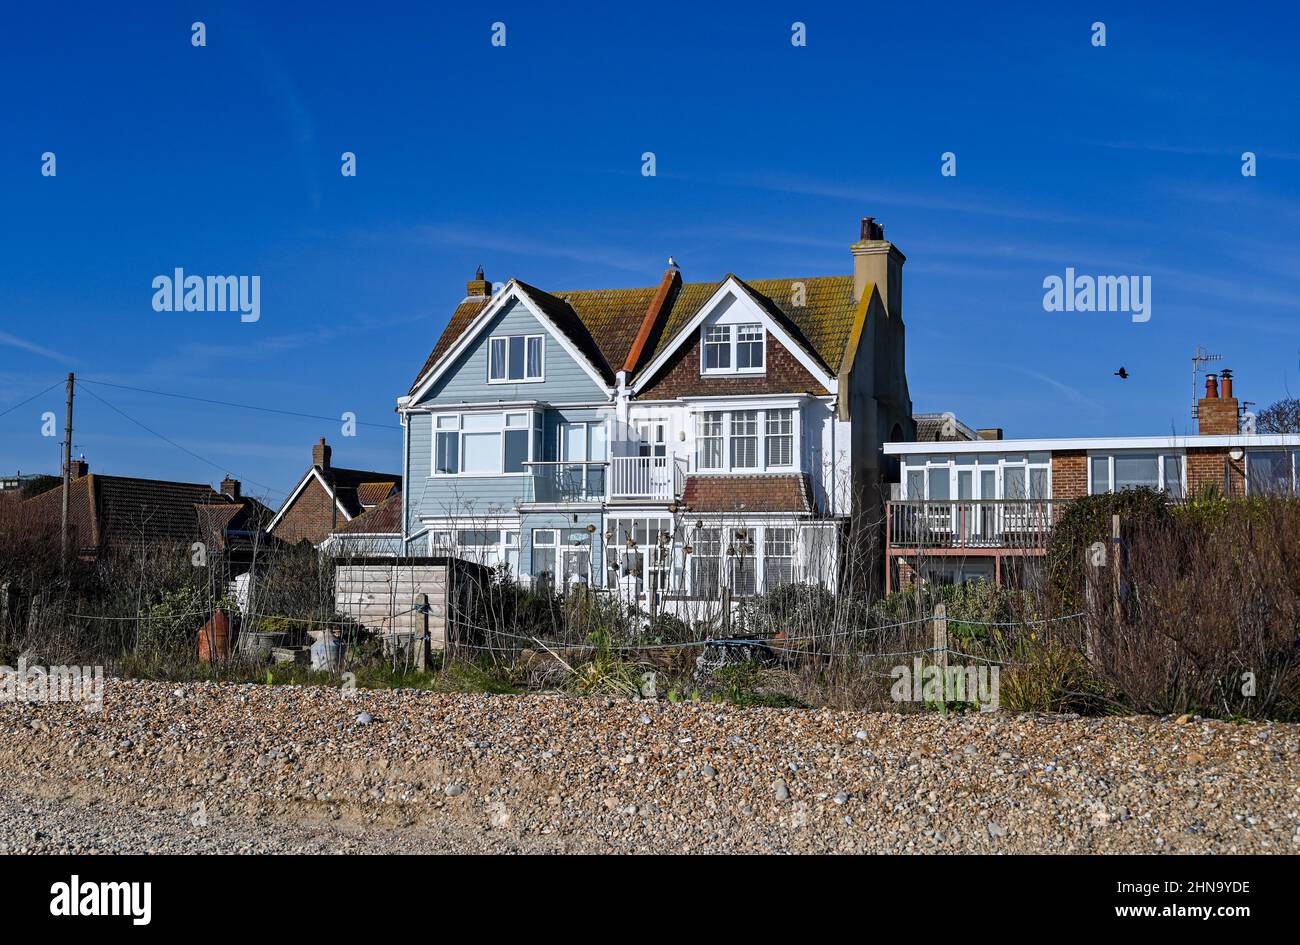 Pevensey Bay Views East Sussex England UK - Houses overlooking the seafront and beach Stock Photo